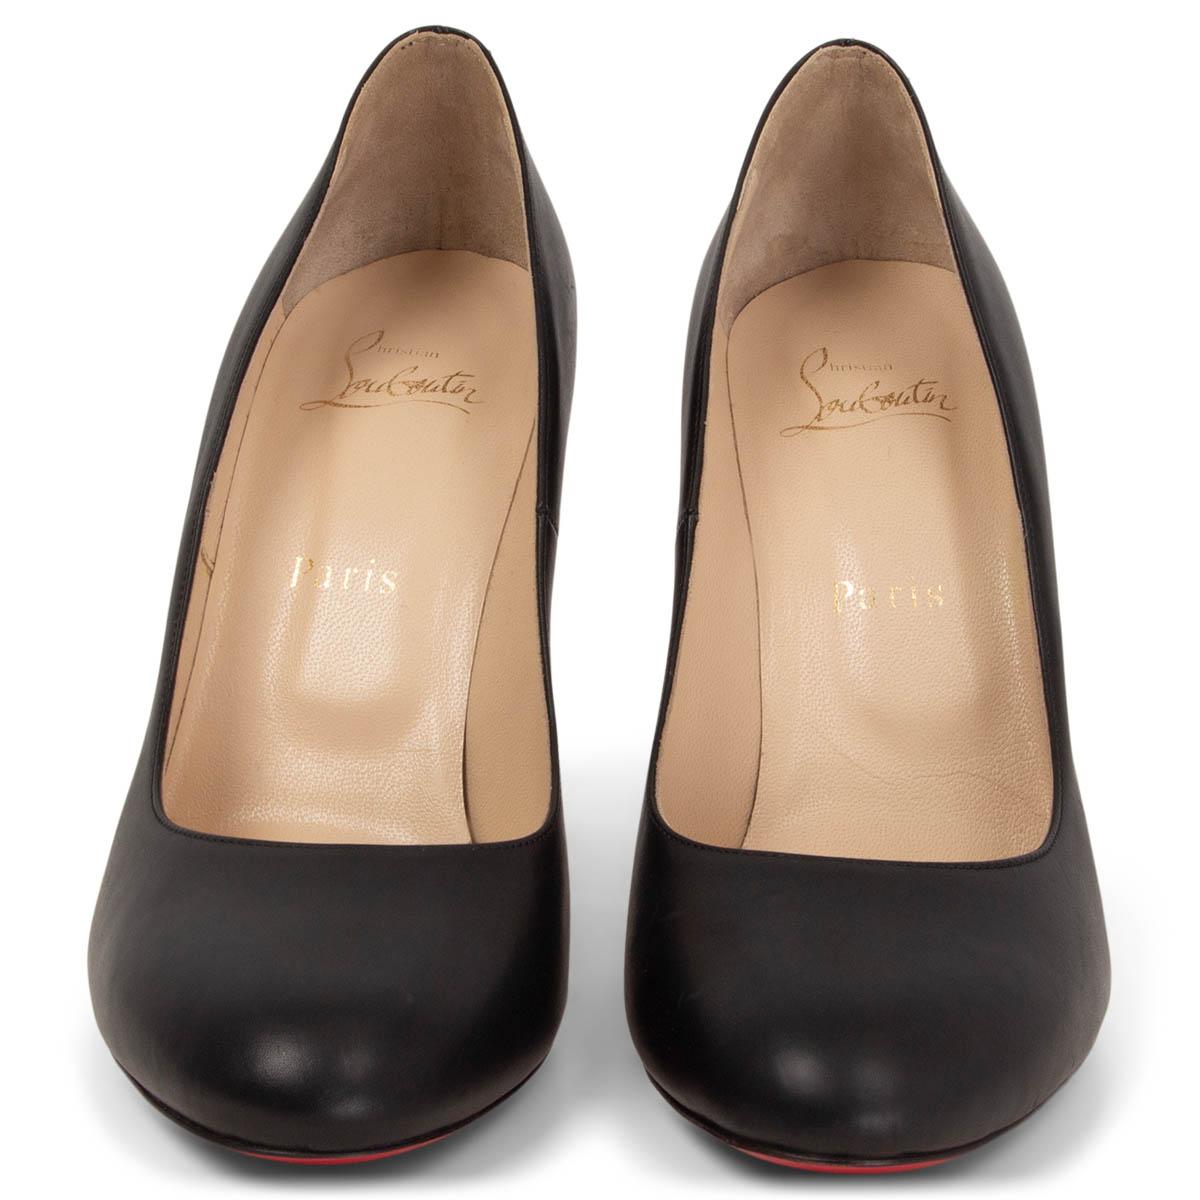 100% authentic Christian Louboutin Simple round-toe pumps in black matte leather featuring signature red leather sole. Brand new. 

Measurements
Imprinted Size	38.5
Shoe Size	38.5
Inside Sole	25cm (9.8in)
Width	7.5cm (2.9in)
Heel	10cm (3.9in)

All